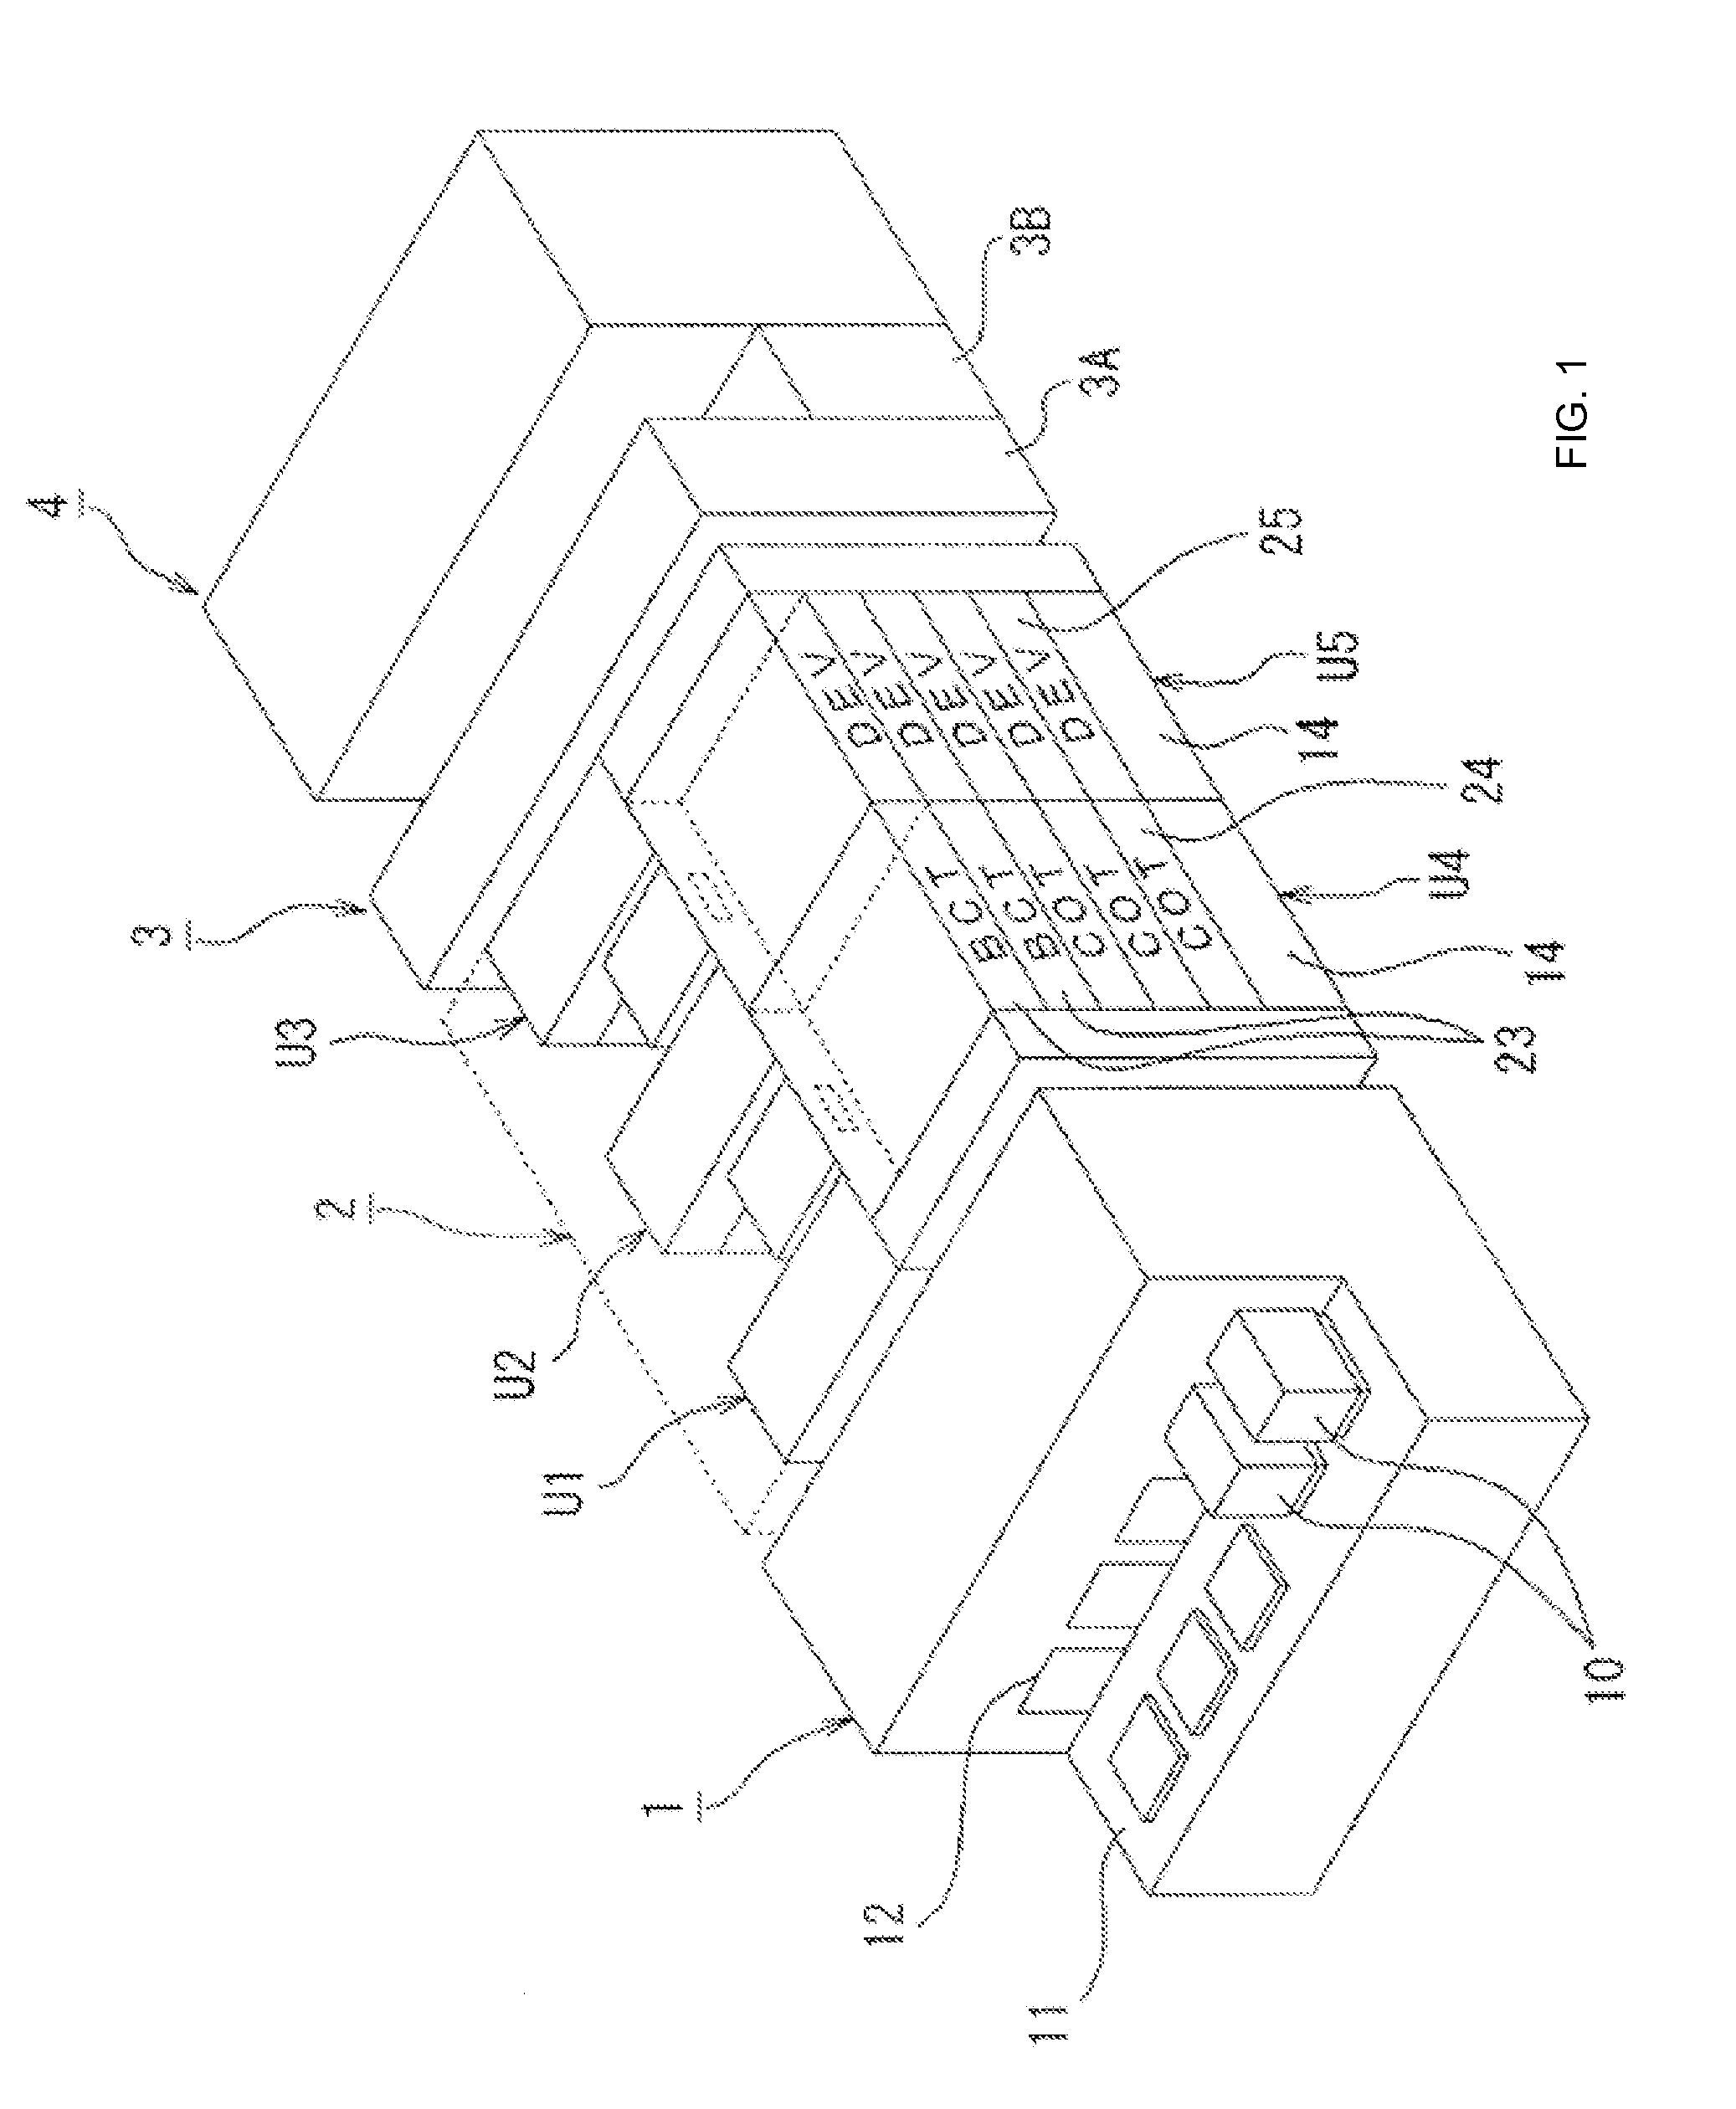 Method and apparatus for increased recirculation and filtration in a photoresist dispense system using a liquid empty reservoir